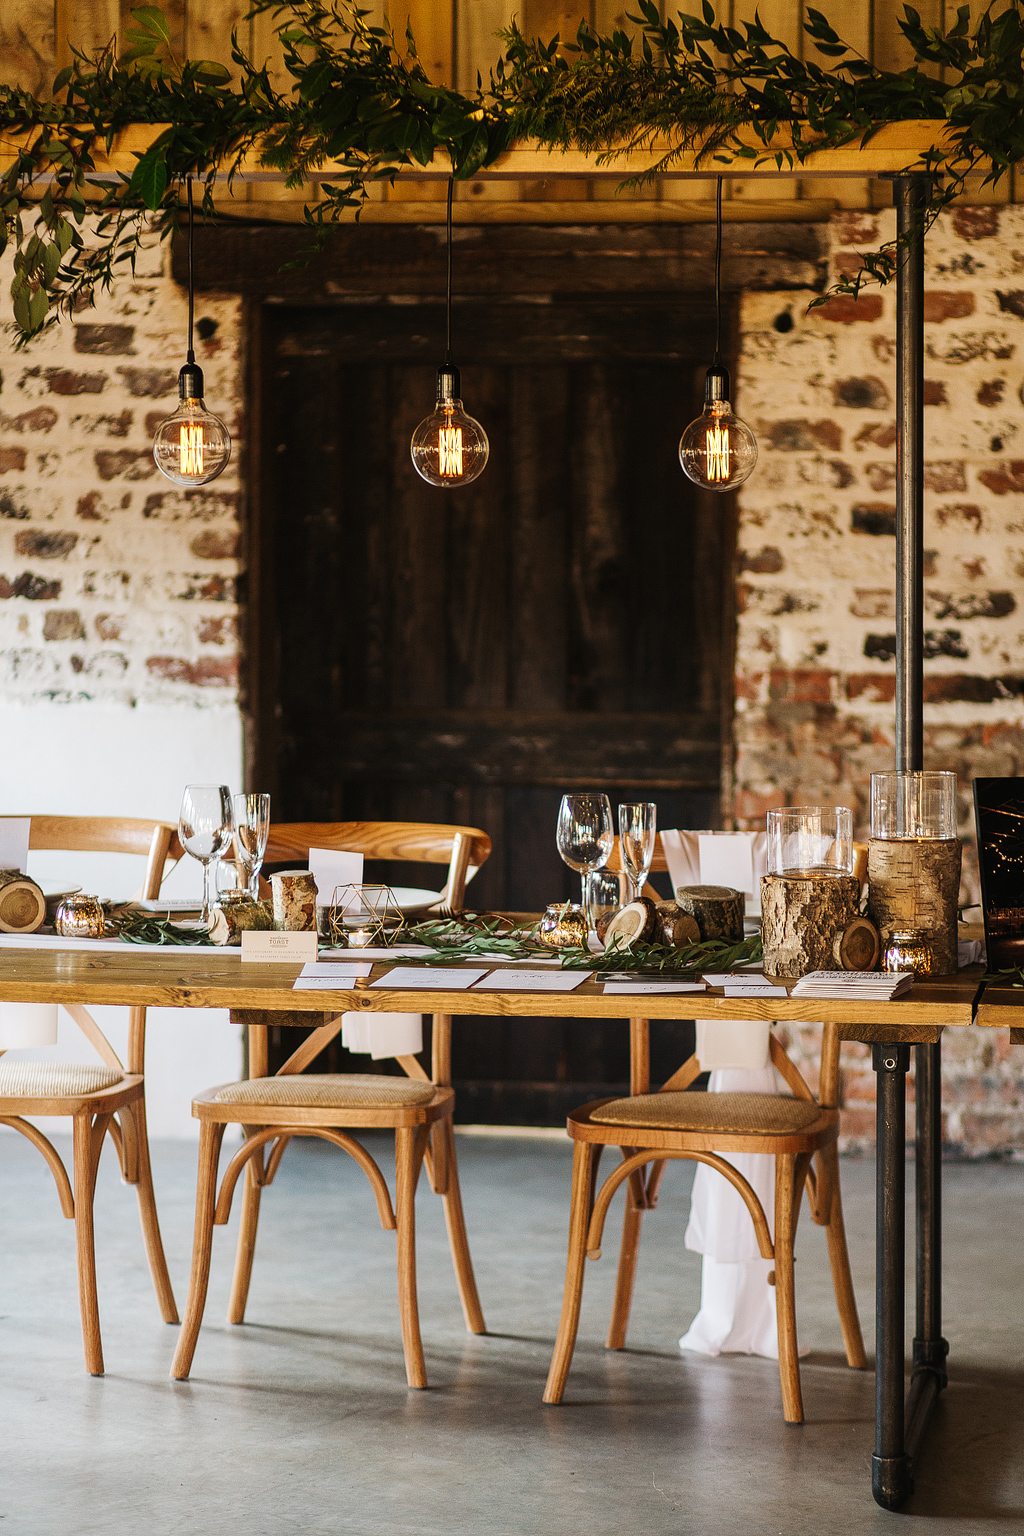 how to style a cool wedding in a barn